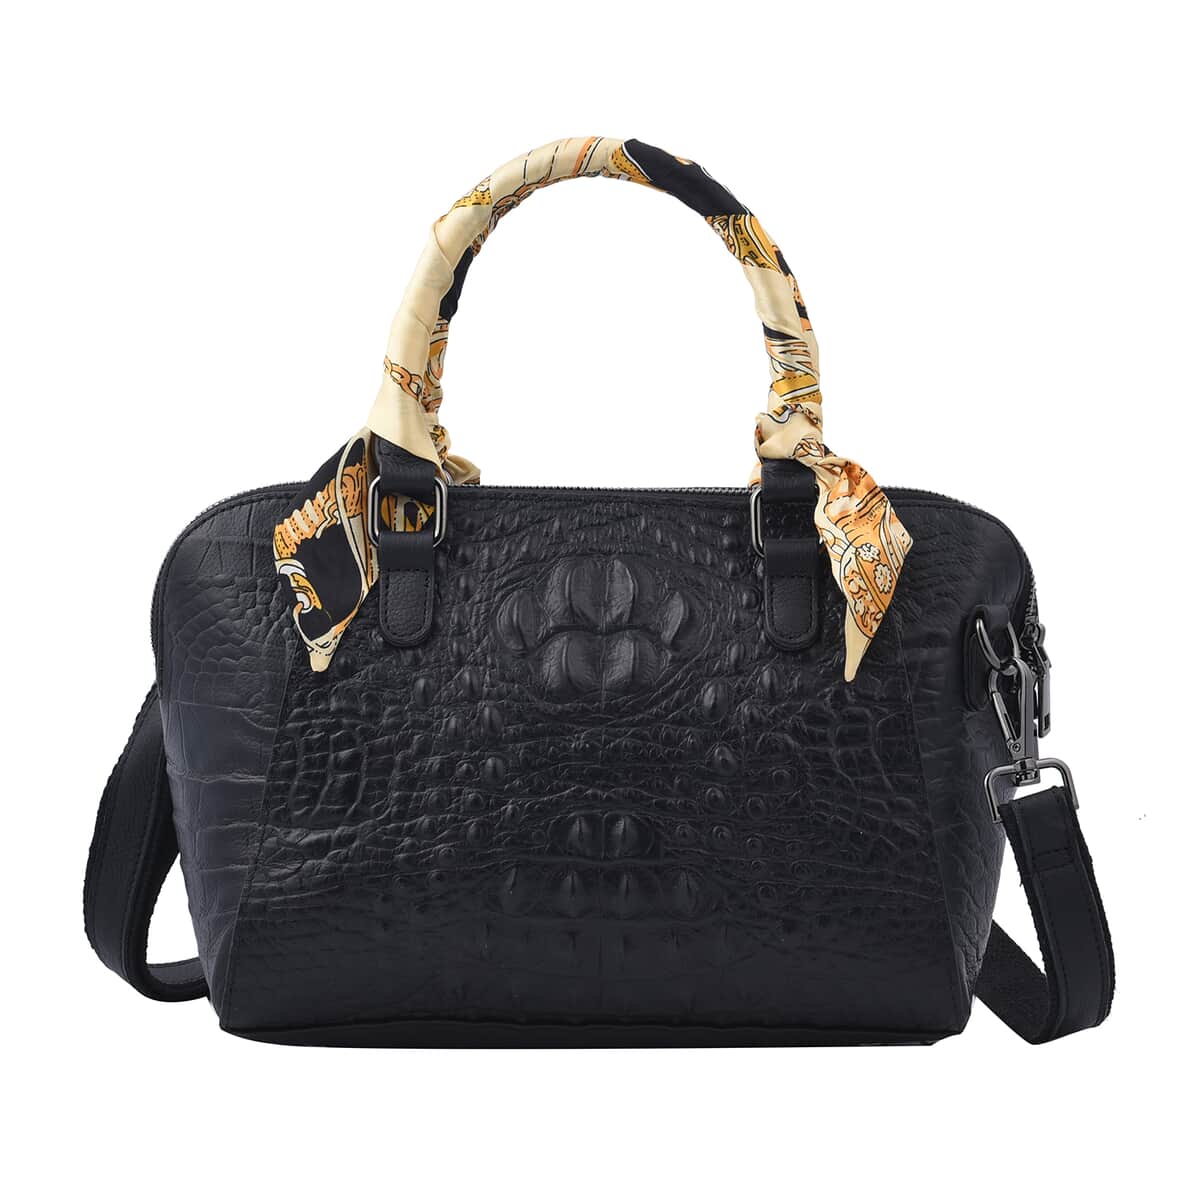 Black Crocodile Embossed Pattern Genuine Leather Crossbody Bag (12.25"x4"x7.21") with Hand Scarf Strap and Shoulder Strap image number 0